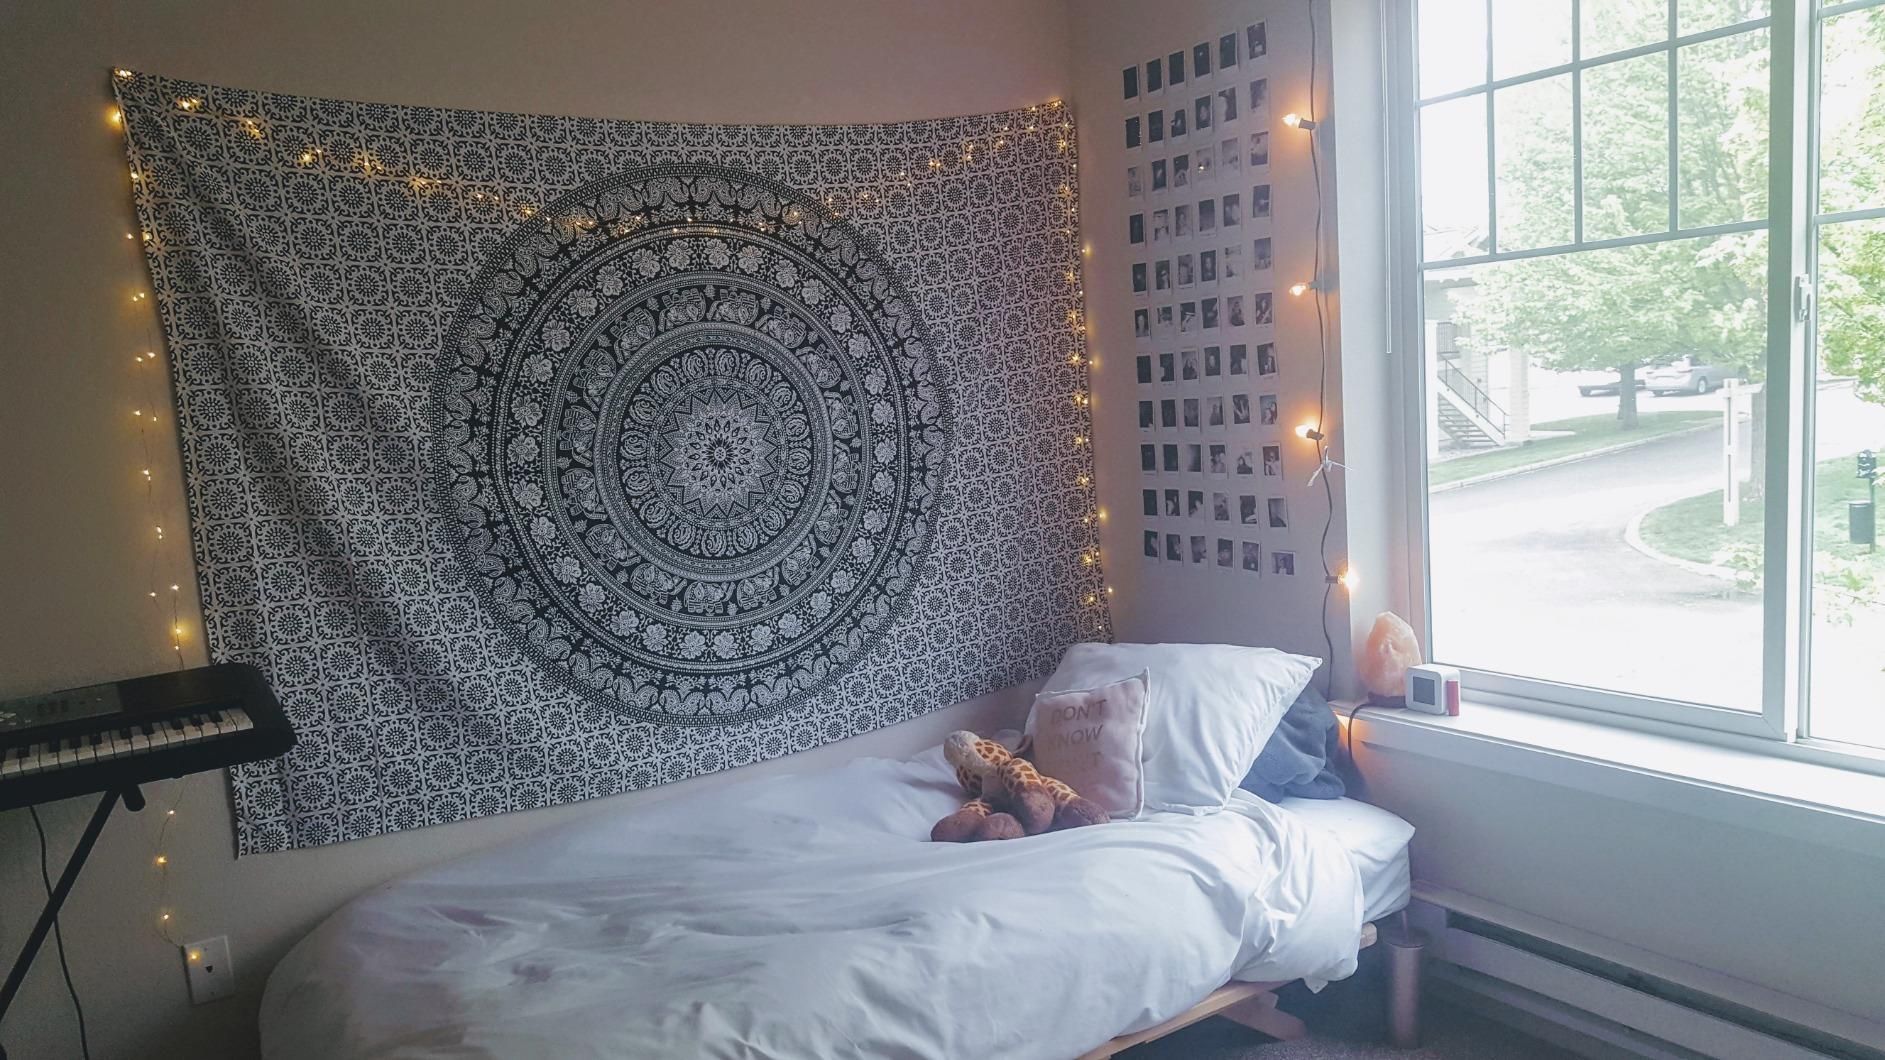 Black And White Indian Mandala Tapestry -   17 room decor Indie tapestries ideas